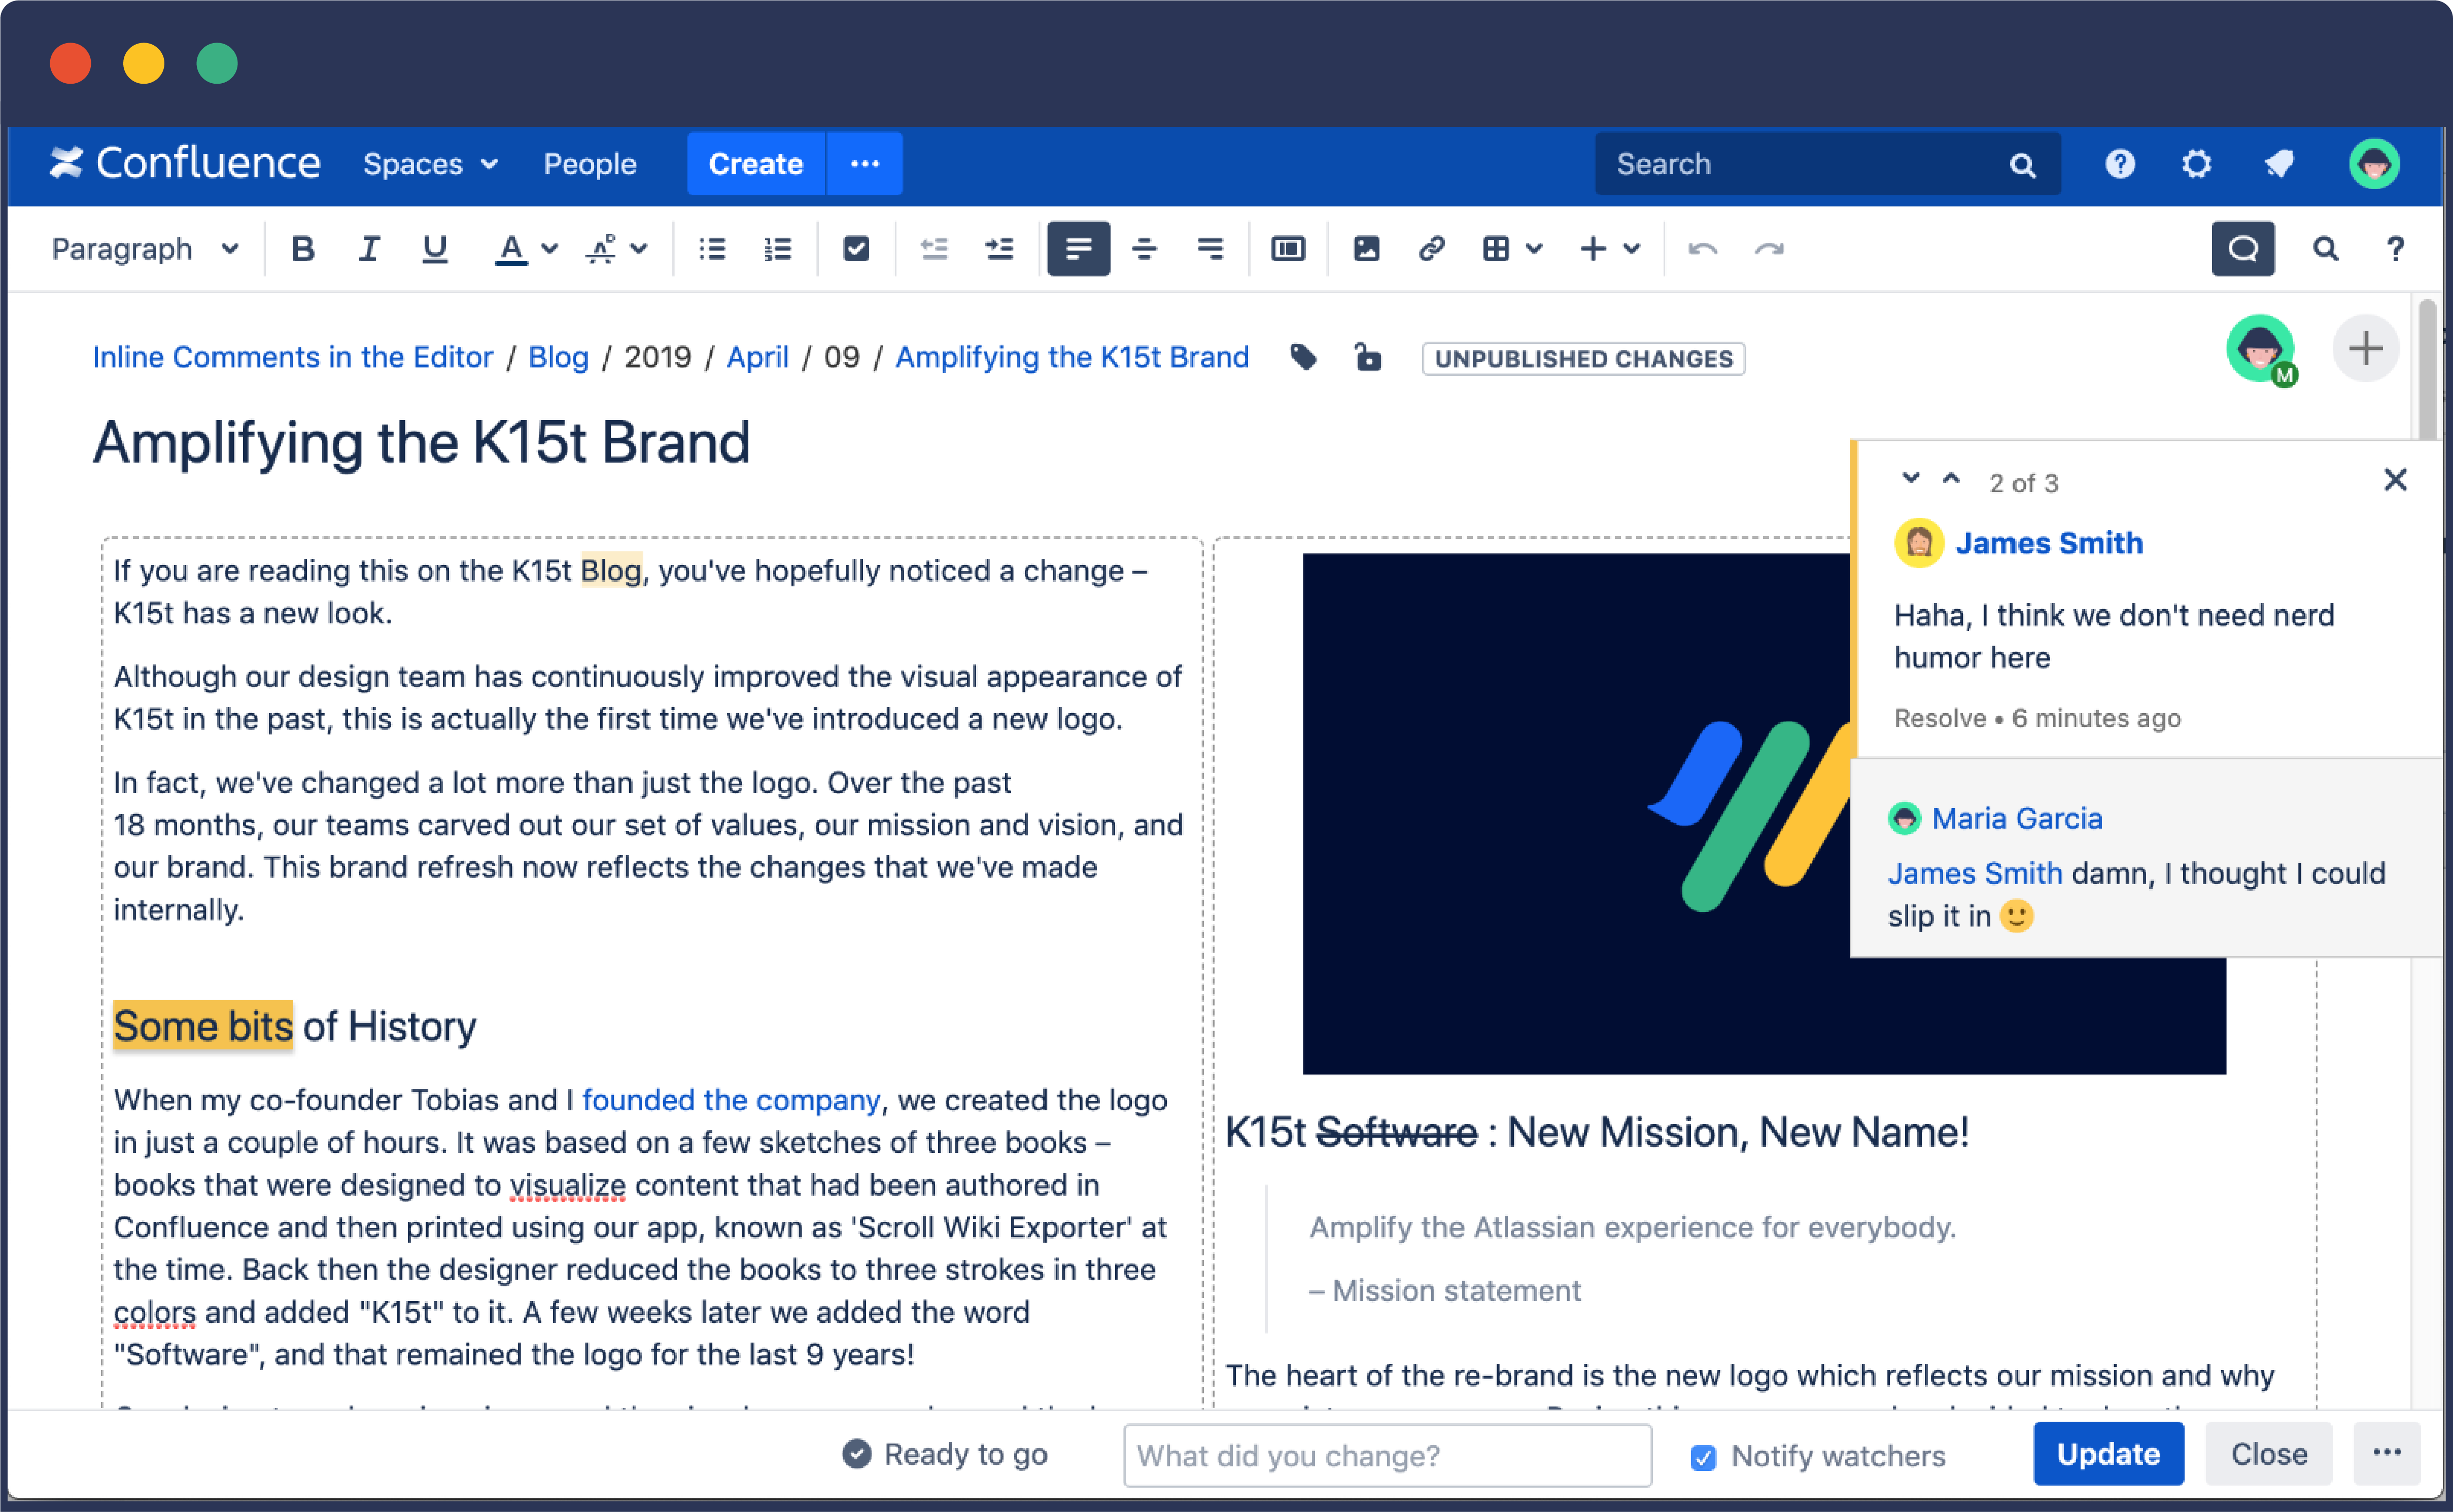 5 Tips for Getting Started with Confluence